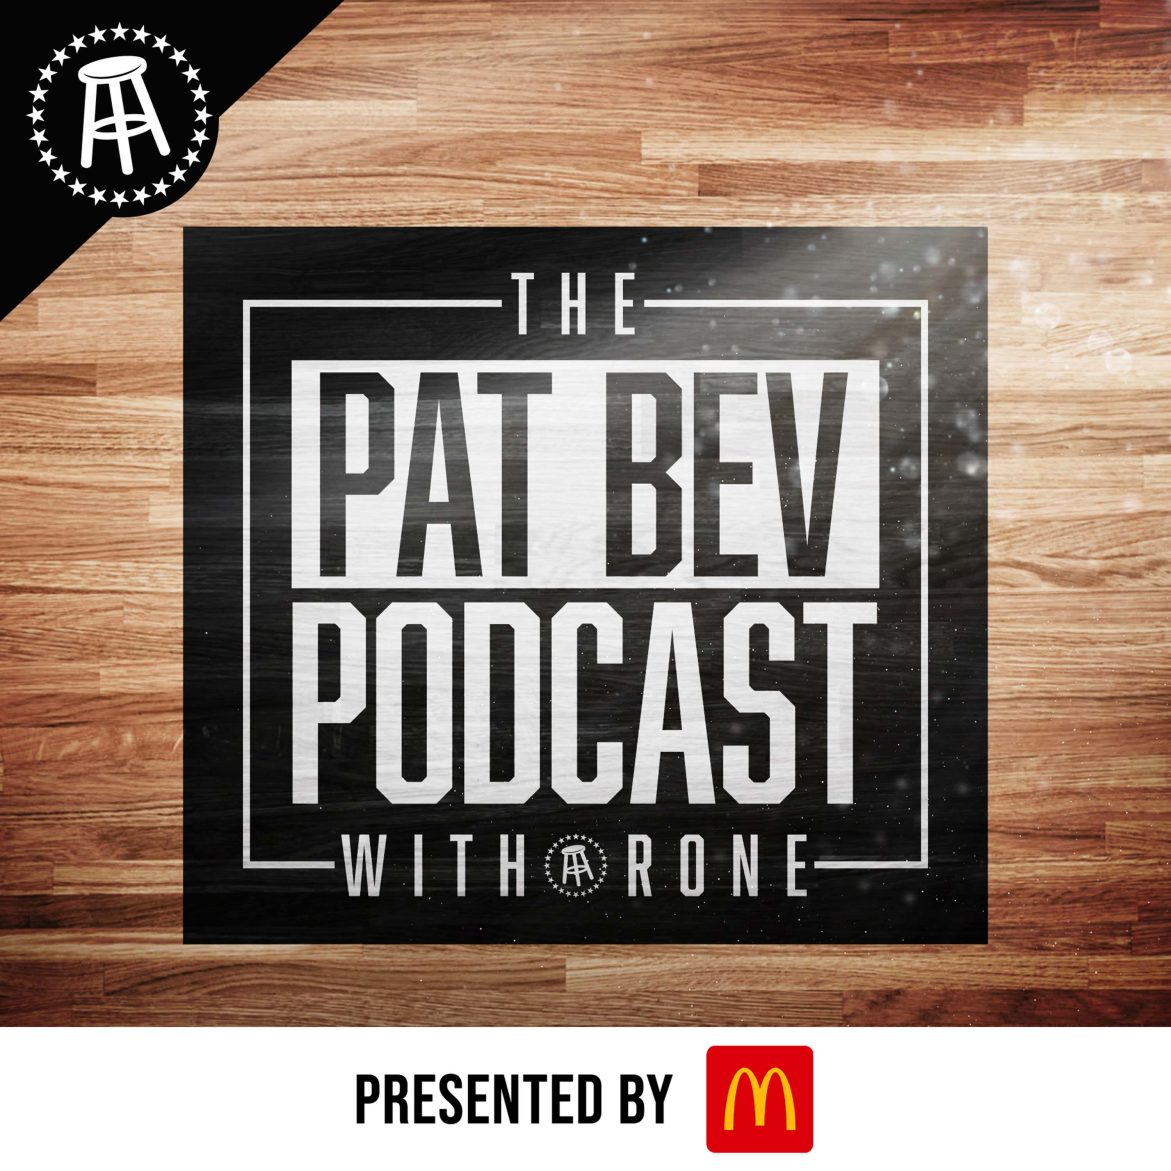 Black Podcasting - The Pat Bev Podcast with Rone: Ep. 80